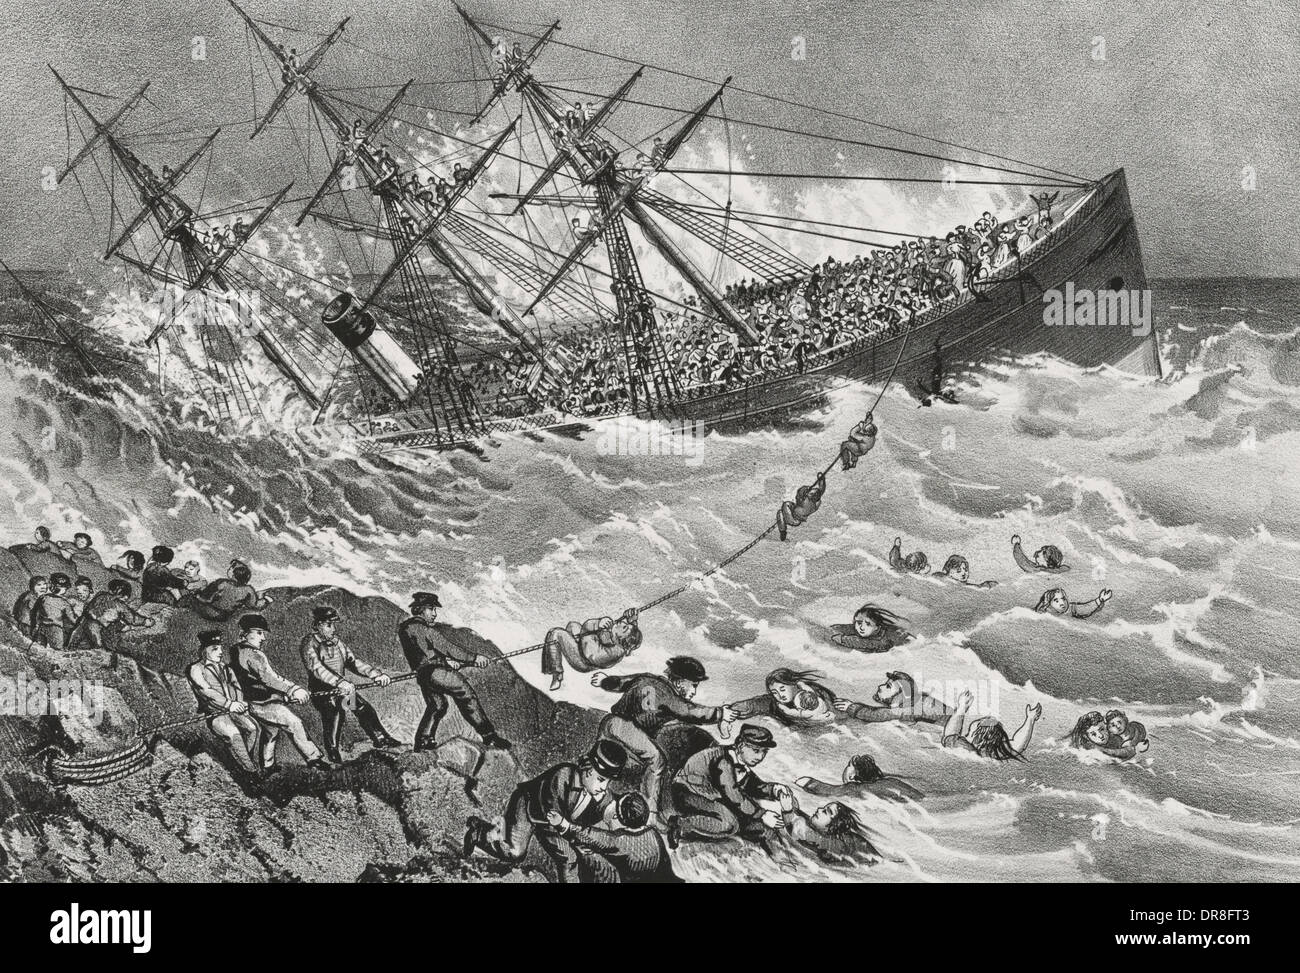 The Wreck of the Atlantic - From Liverpool to New York sank off the Coast of Nova Scotia - April 1st 1873 - 562 lives were lost Stock Photo